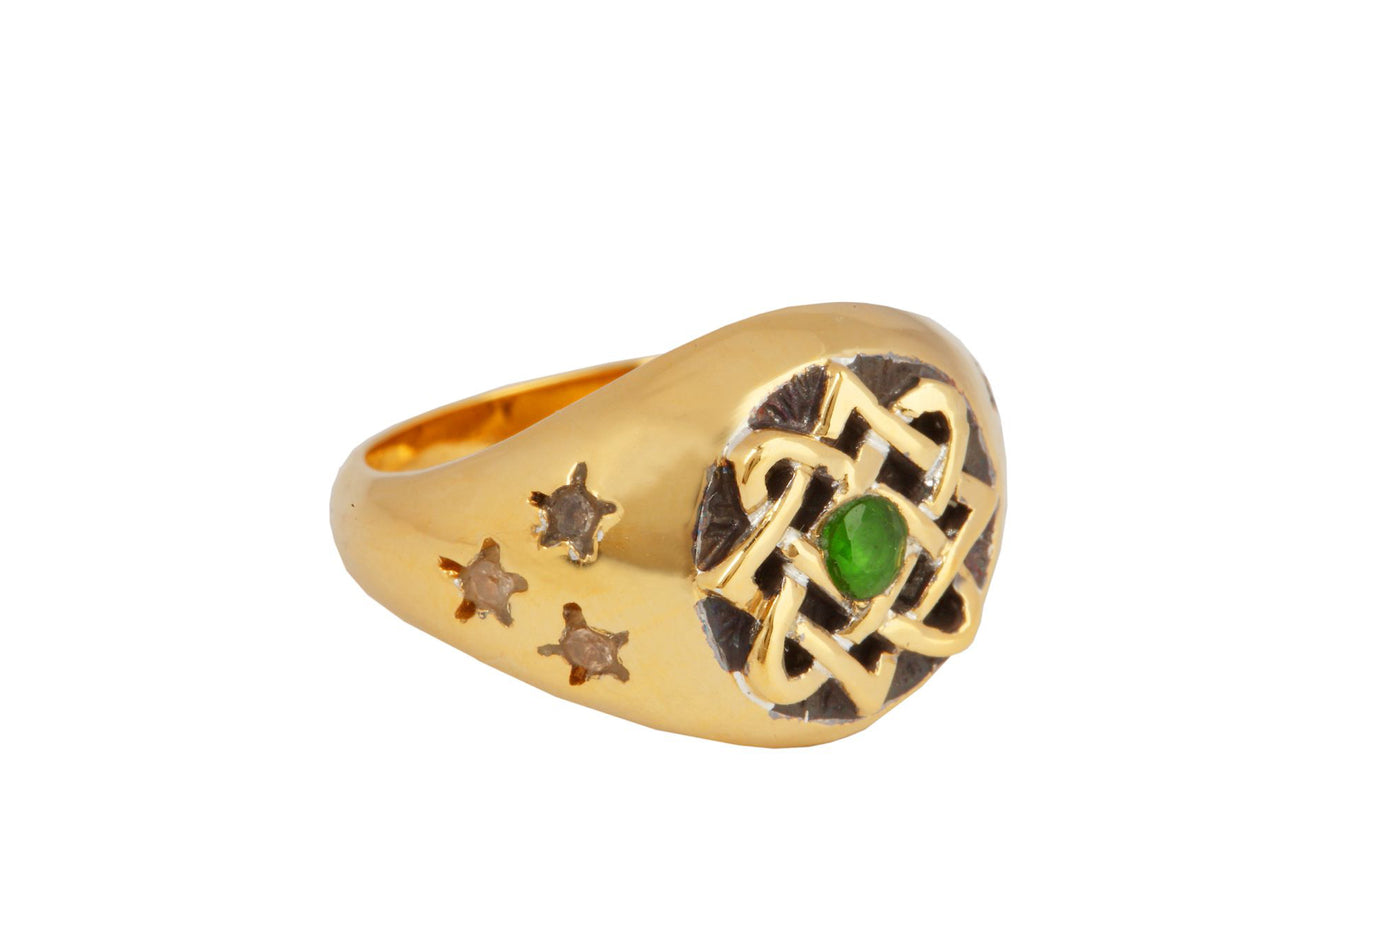 Lada star ring with tzavorite. Gold plated